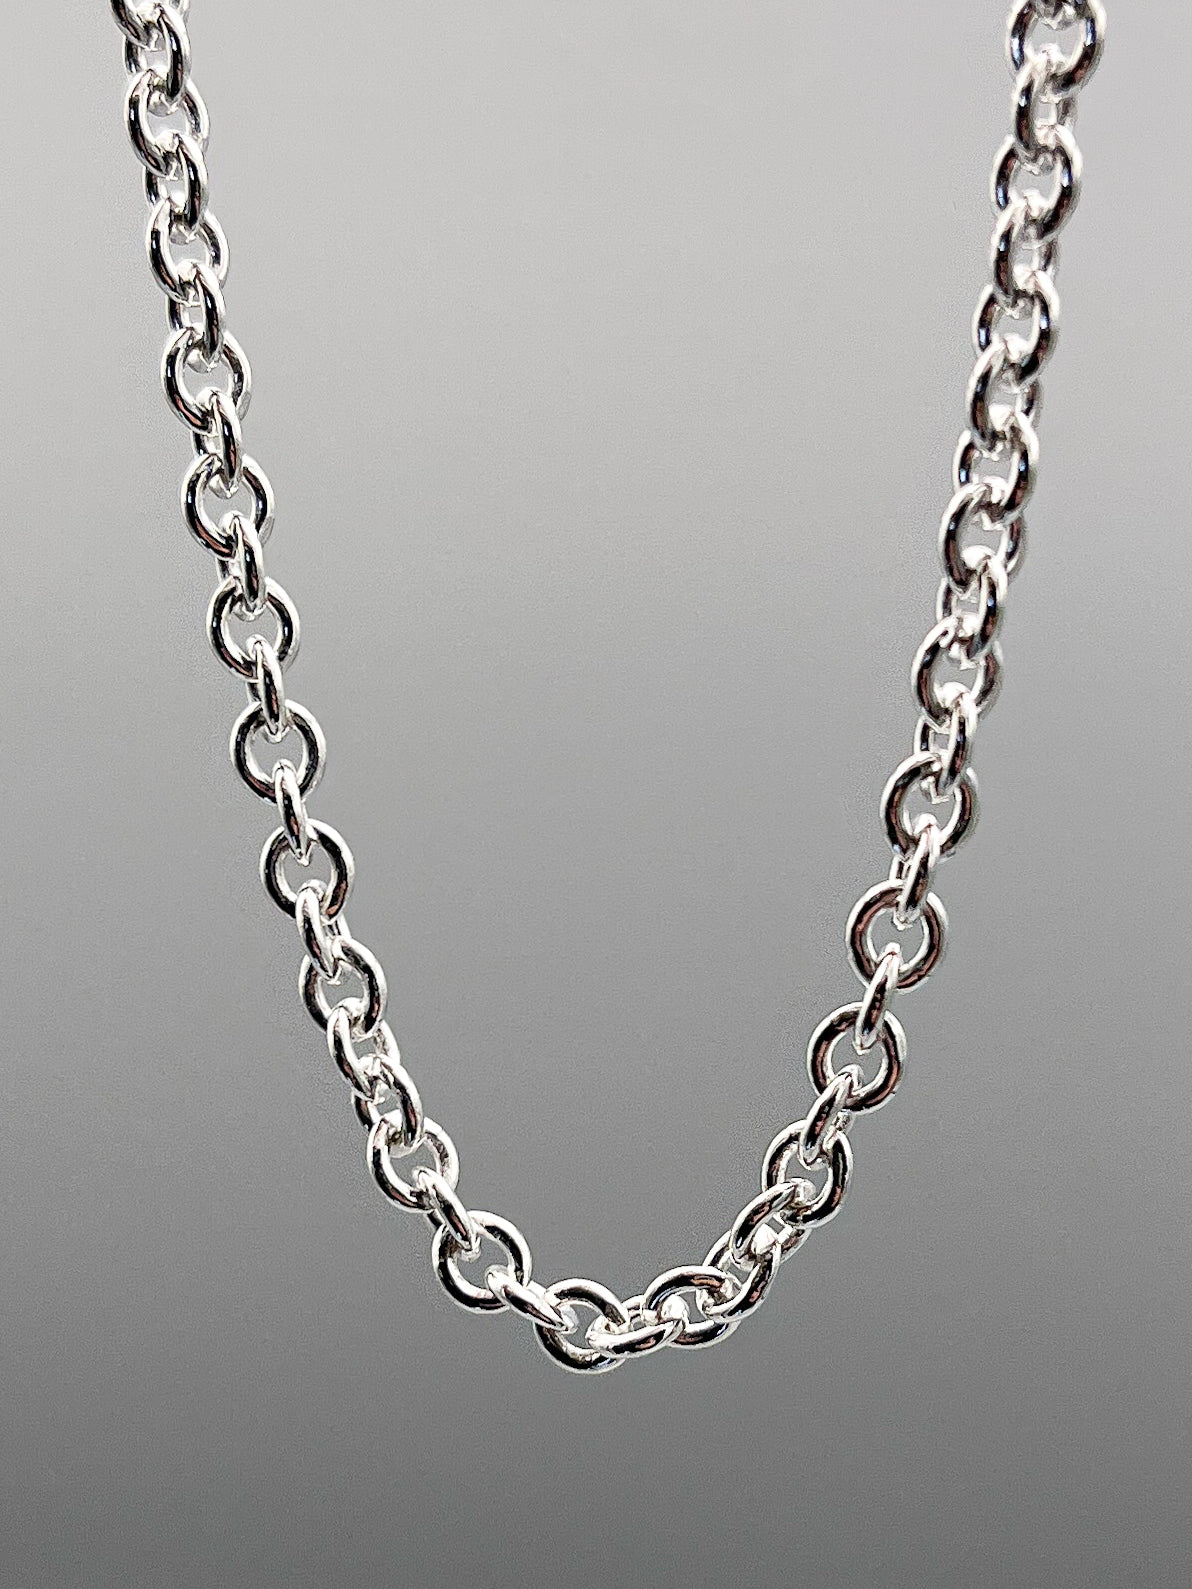 Sterling Silver Necklace. 18” (45cm) long polished 3.9mm round link